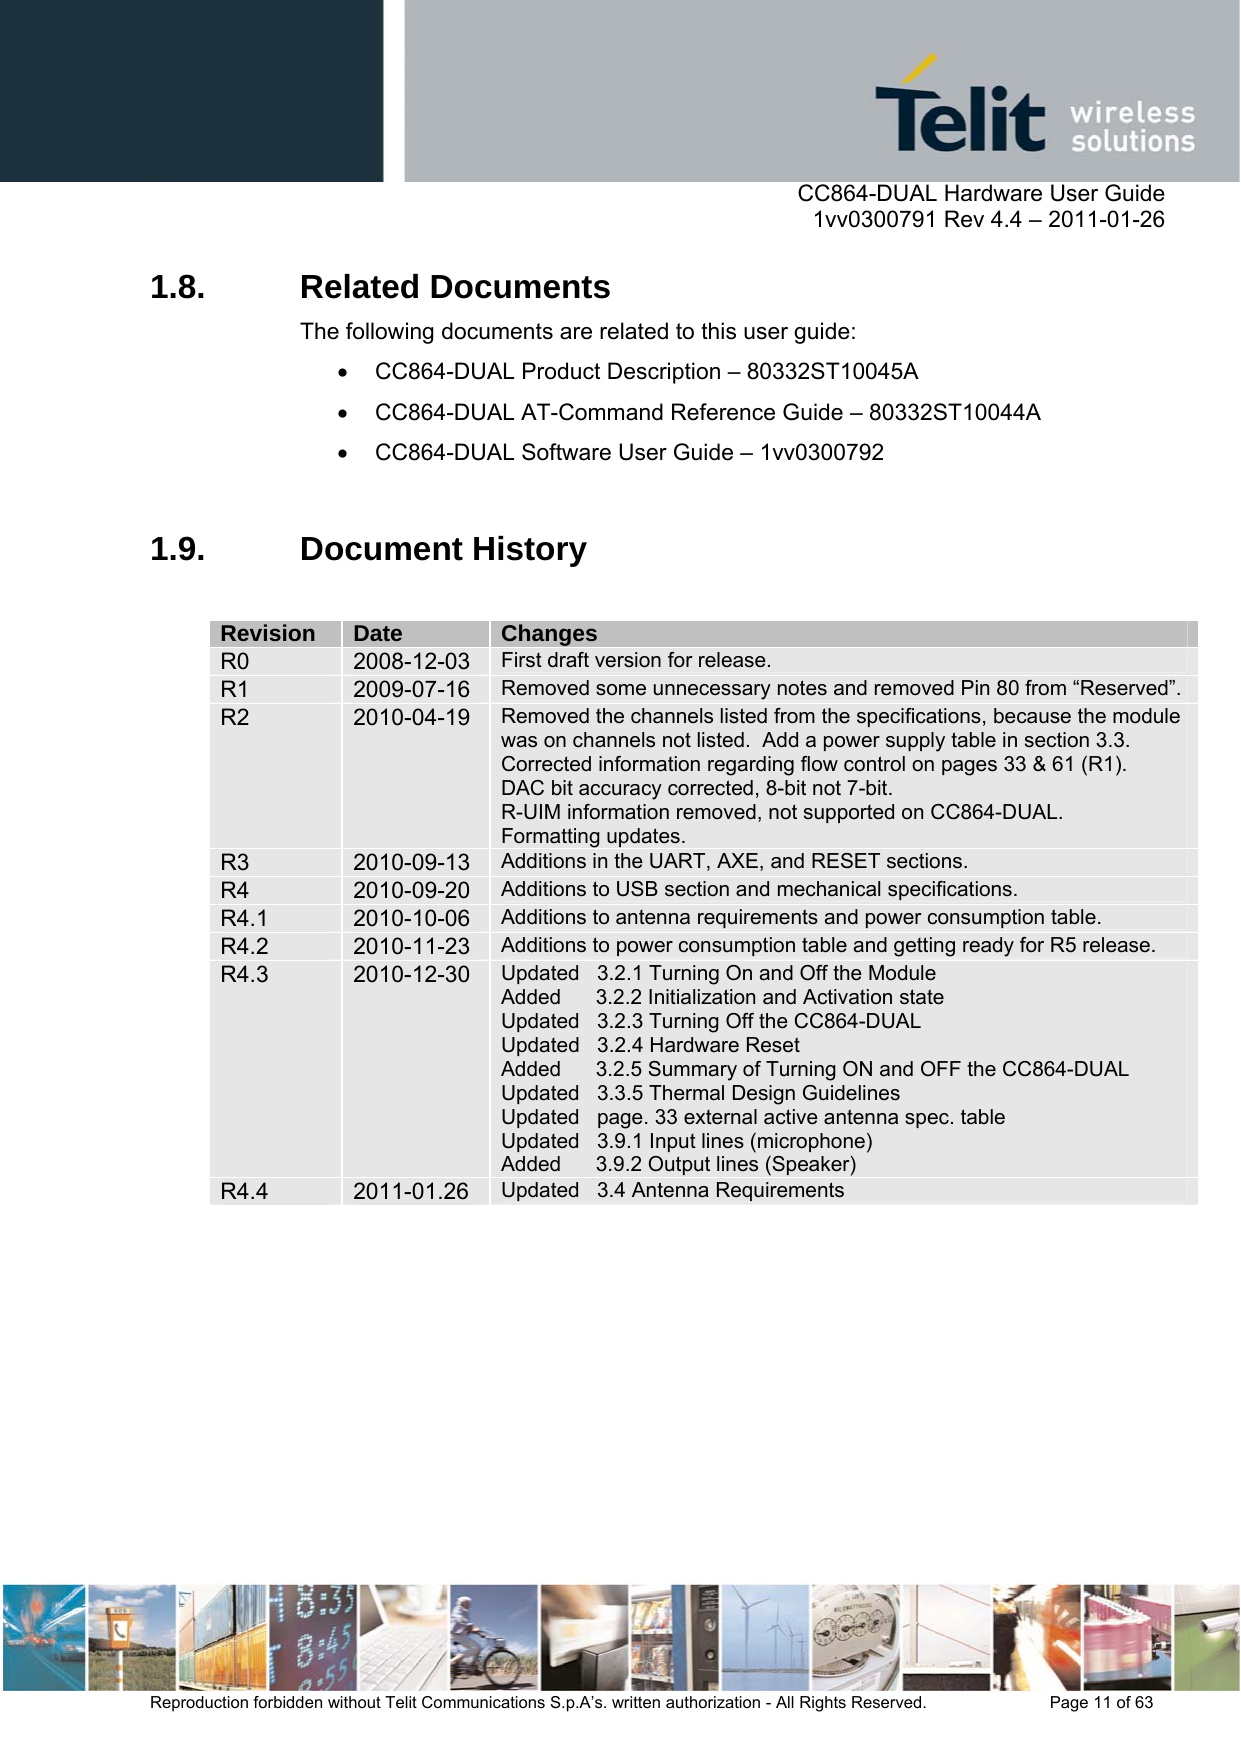      CC864-DUAL Hardware User Guide    1vv0300791 Rev 4.4 – 2011-01-26  Reproduction forbidden without Telit Communications S.p.A’s. written authorization - All Rights Reserved.    Page 11 of 63  1.8. Related Documents The following documents are related to this user guide:   CC864-DUAL Product Description – 80332ST10045A   CC864-DUAL AT-Command Reference Guide – 80332ST10044A   CC864-DUAL Software User Guide – 1vv0300792  1.9. Document History  Revision  Date  Changes R0  2008-12-03  First draft version for release. R1  2009-07-16  Removed some unnecessary notes and removed Pin 80 from “Reserved”.R2  2010-04-19  Removed the channels listed from the specifications, because the module was on channels not listed.  Add a power supply table in section 3.3. Corrected information regarding flow control on pages 33 &amp; 61 (R1). DAC bit accuracy corrected, 8-bit not 7-bit. R-UIM information removed, not supported on CC864-DUAL. Formatting updates. R3  2010-09-13  Additions in the UART, AXE, and RESET sections. R4  2010-09-20  Additions to USB section and mechanical specifications. R4.1  2010-10-06  Additions to antenna requirements and power consumption table. R4.2  2010-11-23  Additions to power consumption table and getting ready for R5 release. R4.3  2010-12-30  Updated   3.2.1 Turning On and Off the Module Added      3.2.2 Initialization and Activation state Updated   3.2.3 Turning Off the CC864-DUAL Updated   3.2.4 Hardware Reset Added      3.2.5 Summary of Turning ON and OFF the CC864-DUAL Updated   3.3.5 Thermal Design Guidelines Updated   page. 33 external active antenna spec. table Updated   3.9.1 Input lines (microphone) Added      3.9.2 Output lines (Speaker) R4.4  2011-01.26  Updated   3.4 Antenna Requirements  